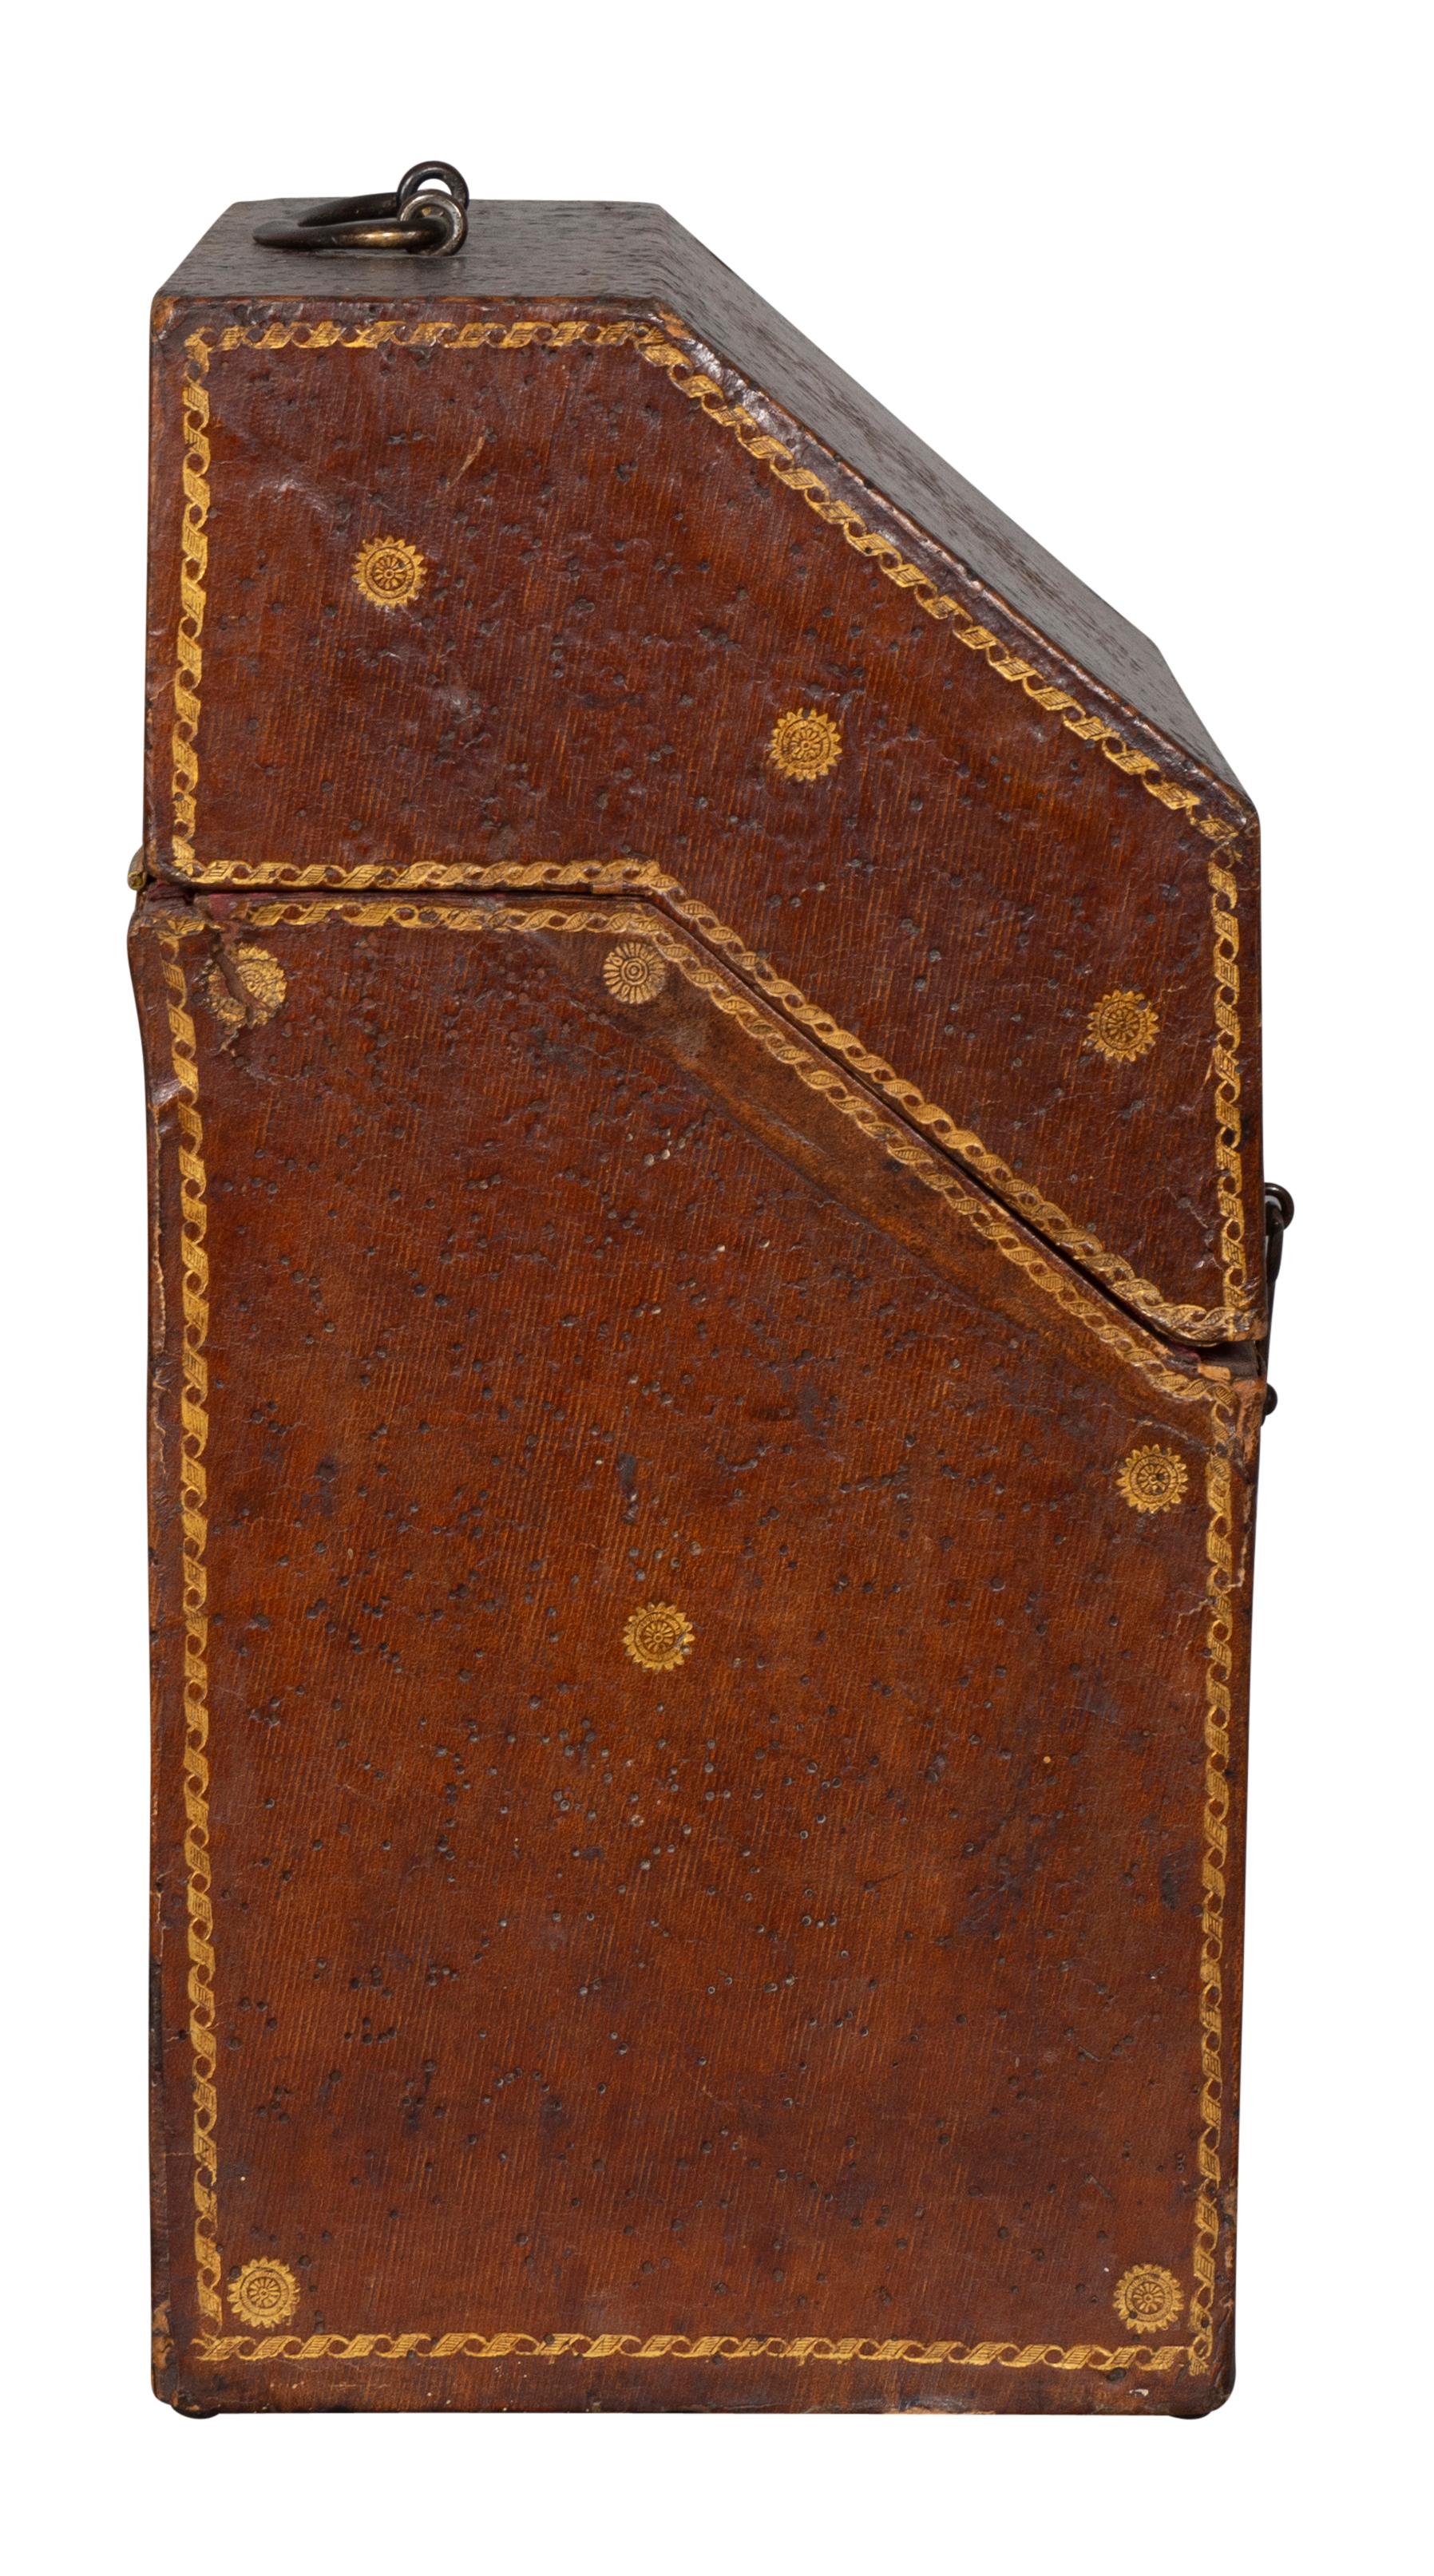 Slant hinged lid opening to a fitted compartment and conforming case with overall tooled decoration. Iron handle and latches.